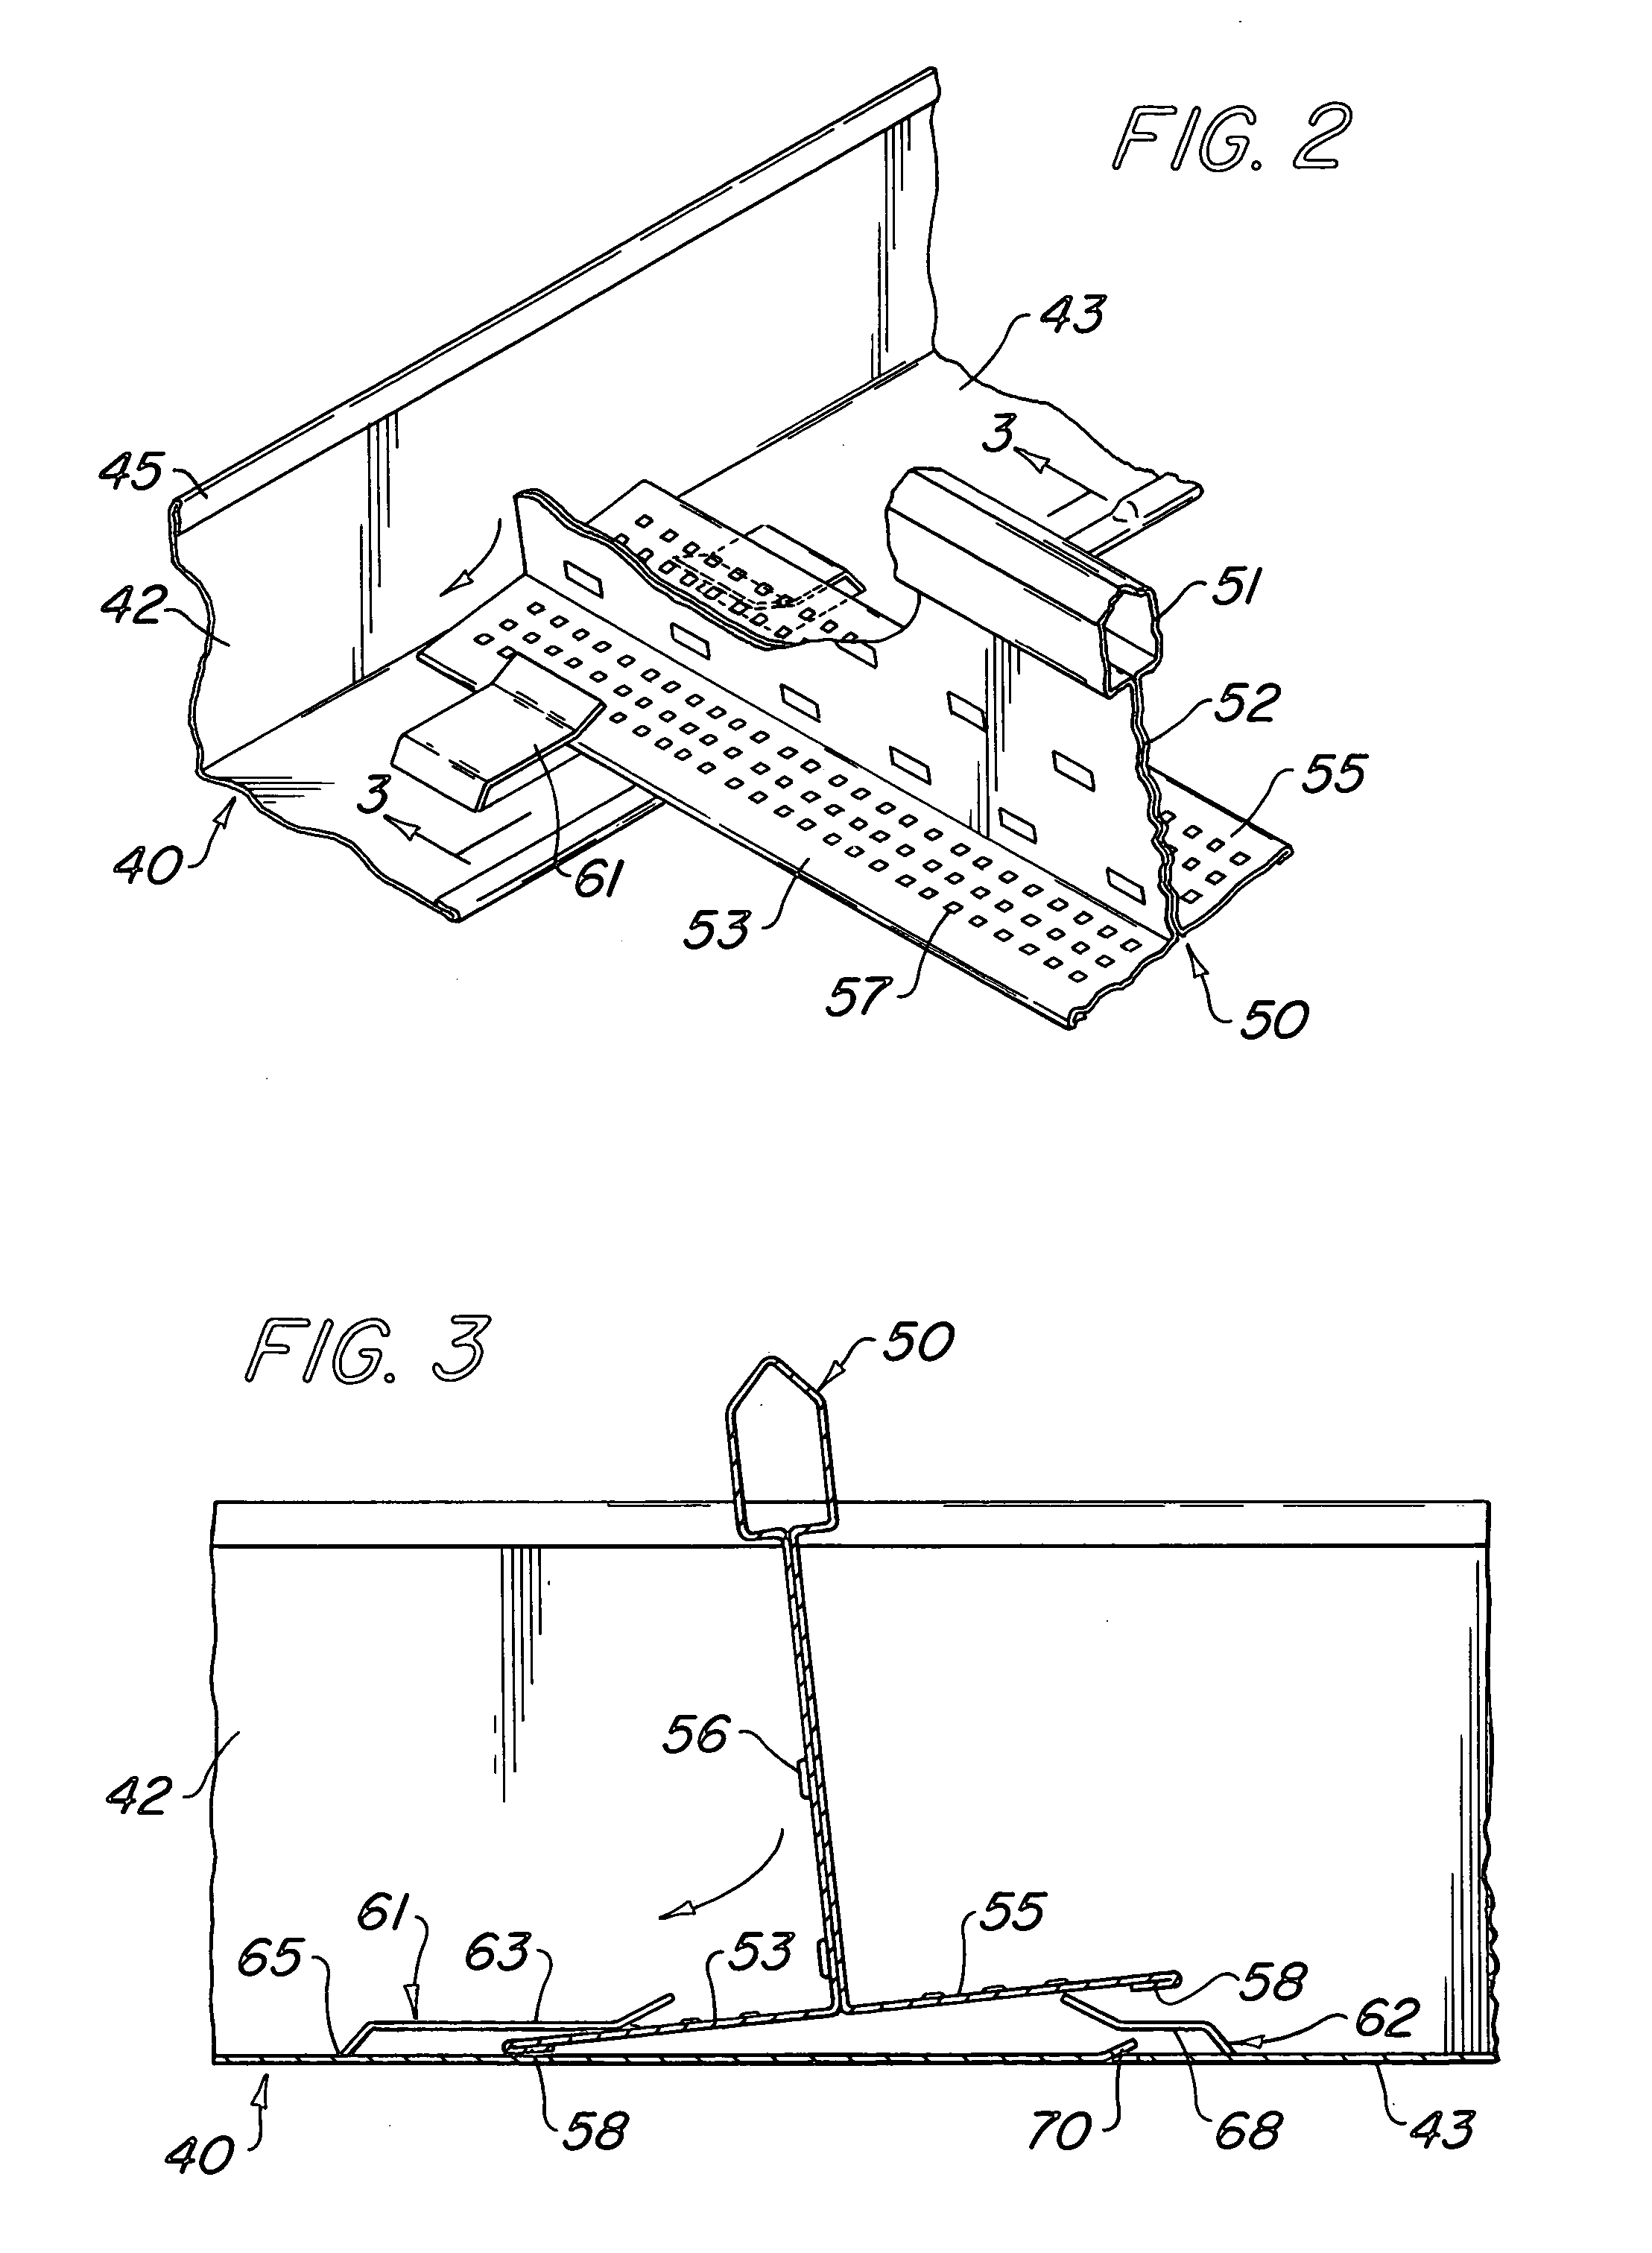 Molding for drywall ceiling grid